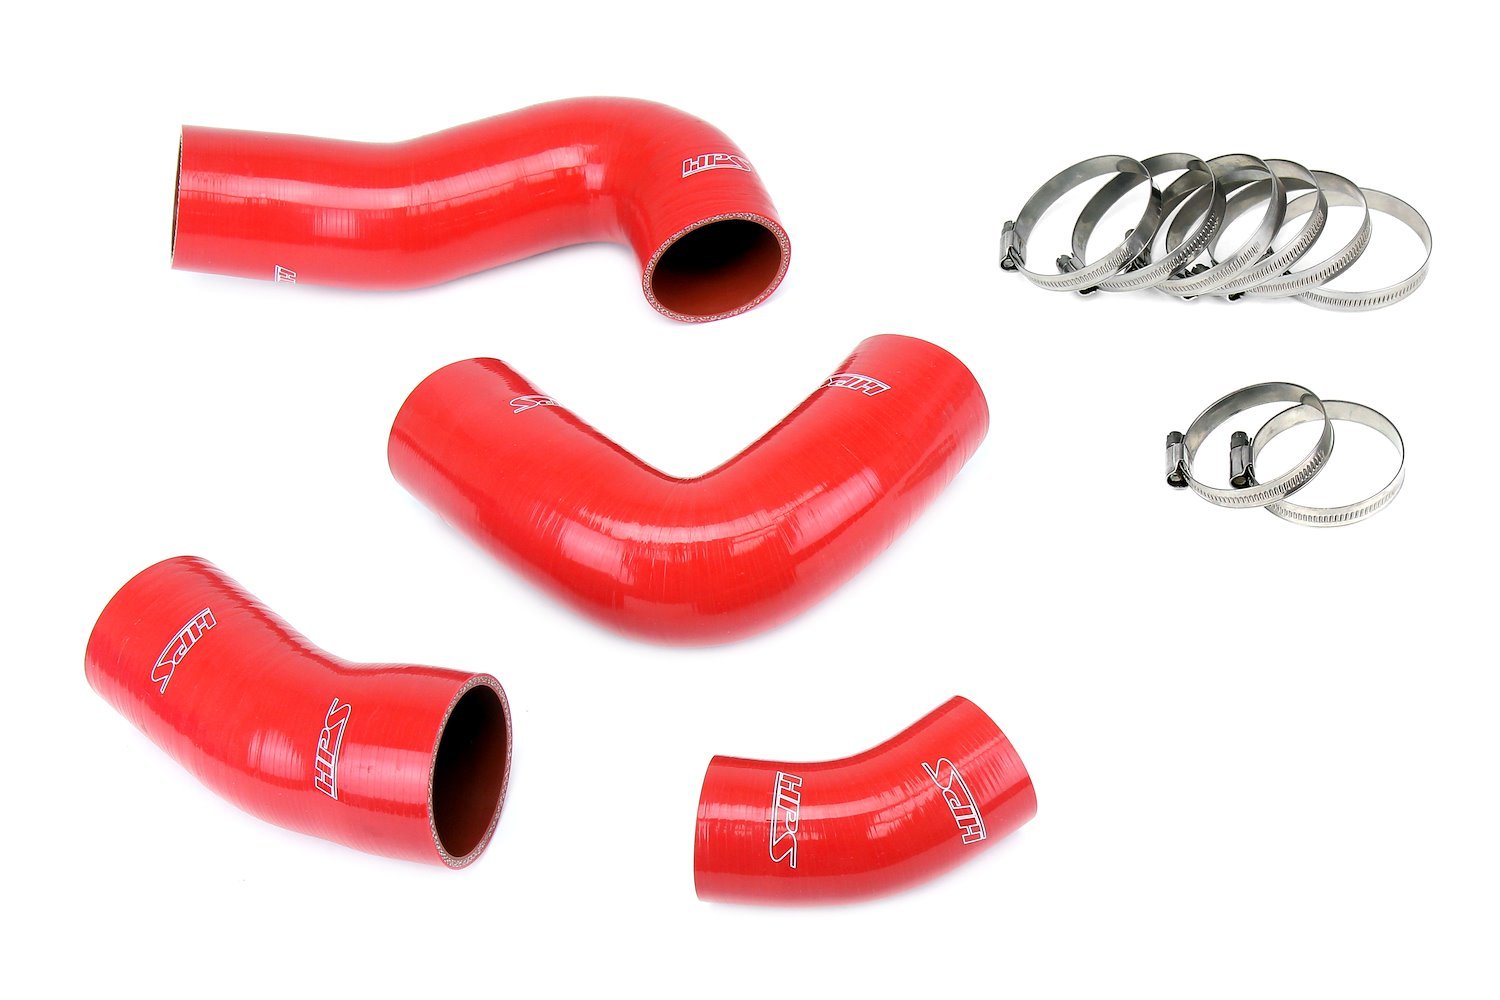 57-1949-RED Intercooler Hose Kit, 4-Ply Reinforced Silicone, Replaces Rubber Intercooler Hoses